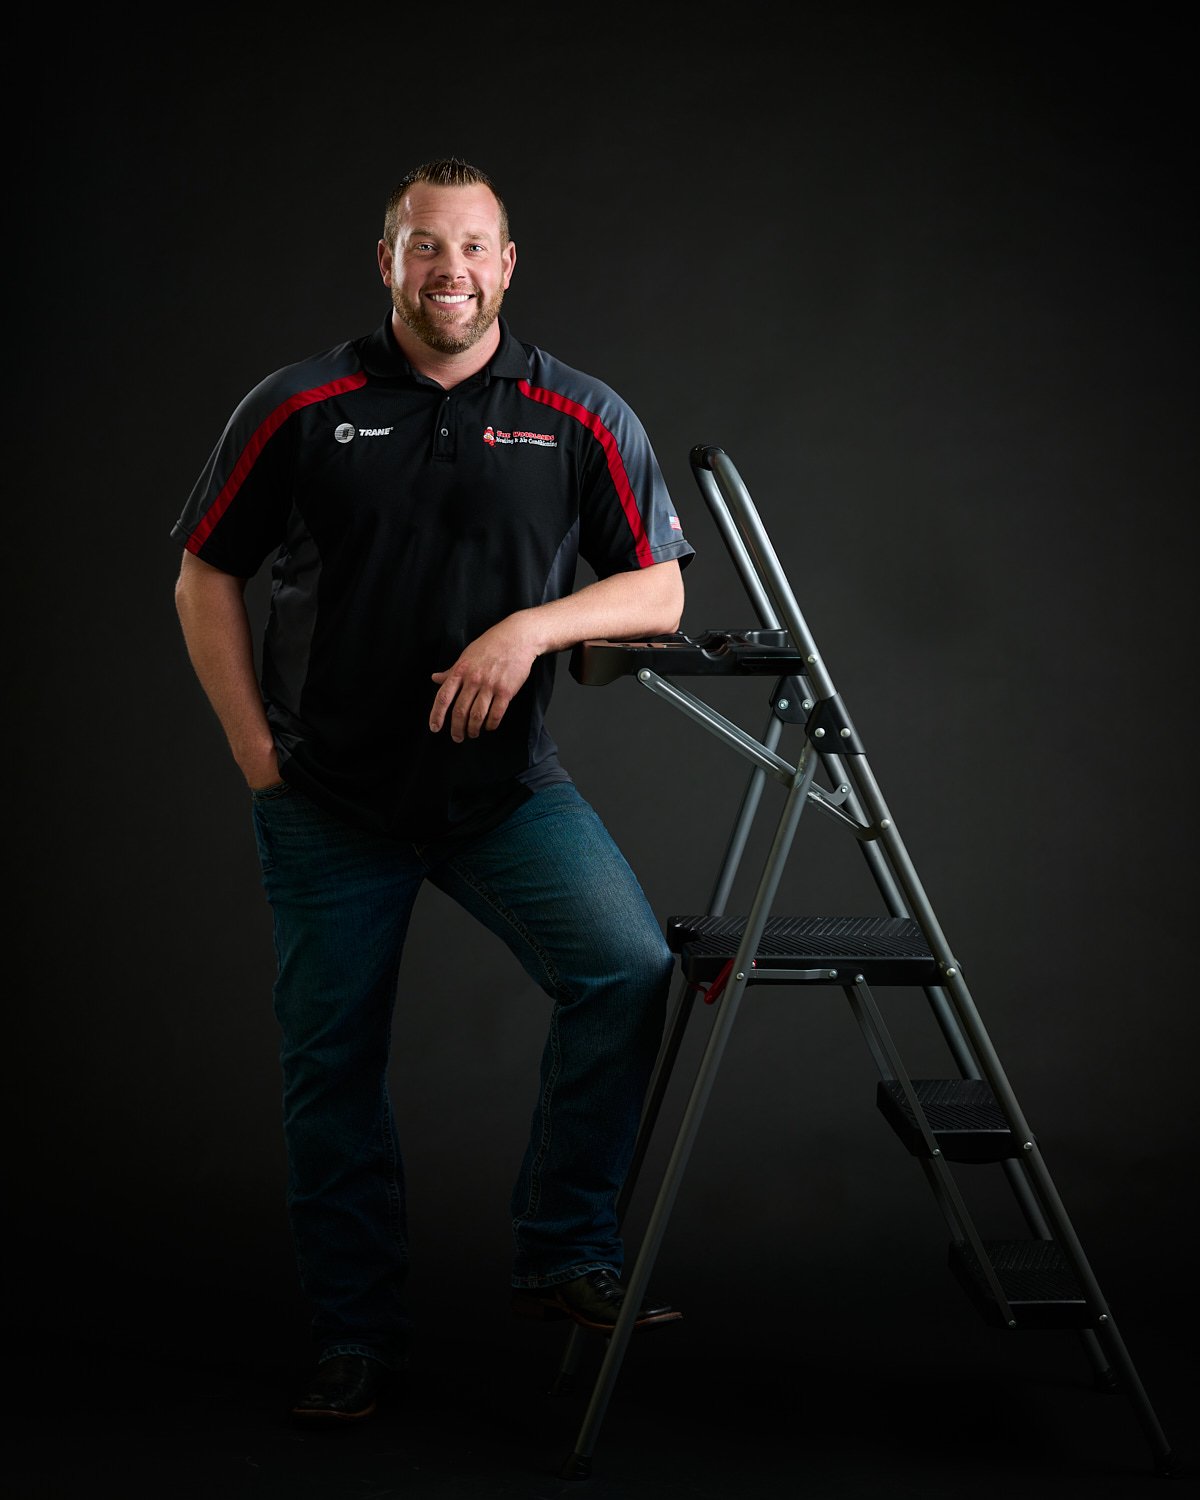  THE WOODLANDS, TEXAS - May 16 2023: Austin Jones of The Woodlands Heating and Air Conditioning is posing against a black background by a ladder dressed in jeans and a polo shirt with his company logo 